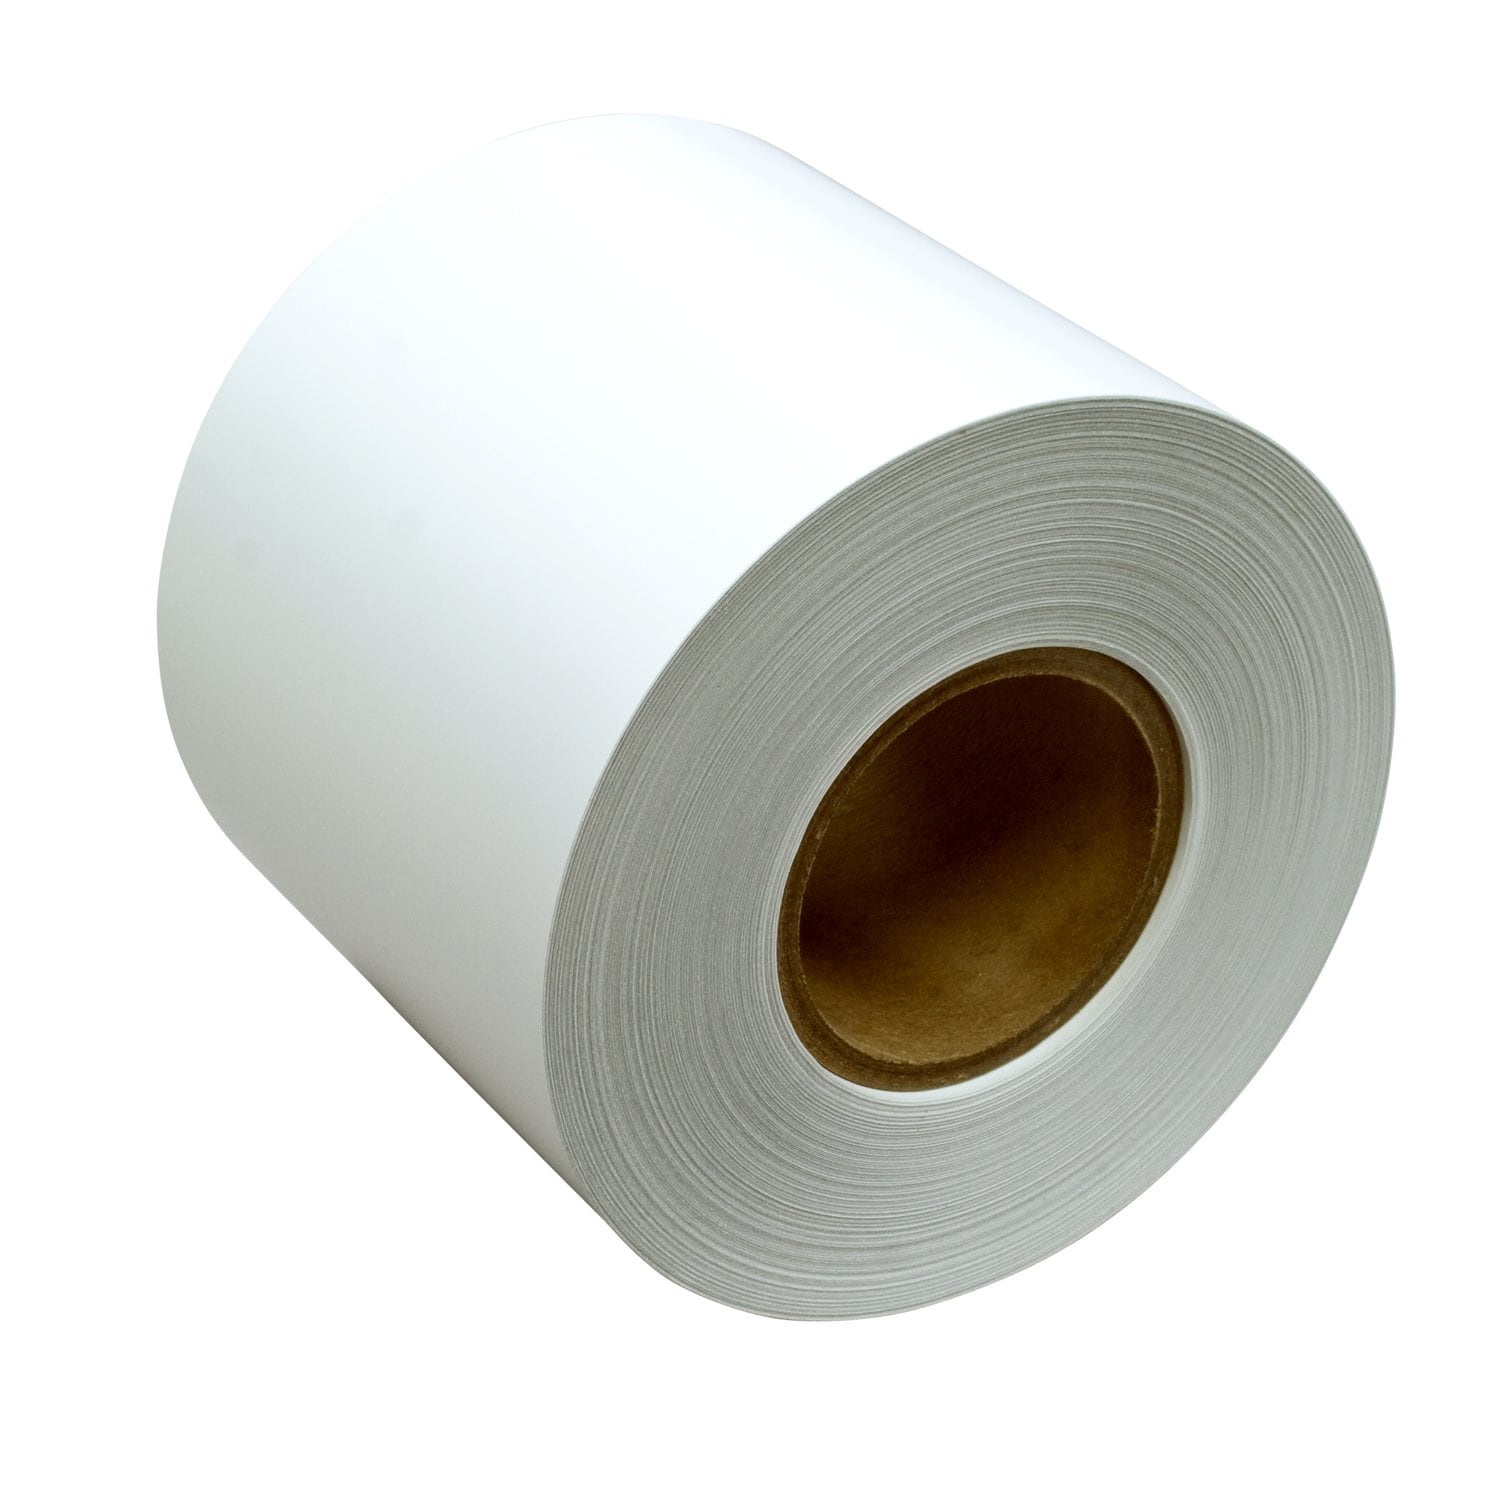 7100072903 - 3M Sheet and Screen Label Material 7213SA , White, Roll, Config